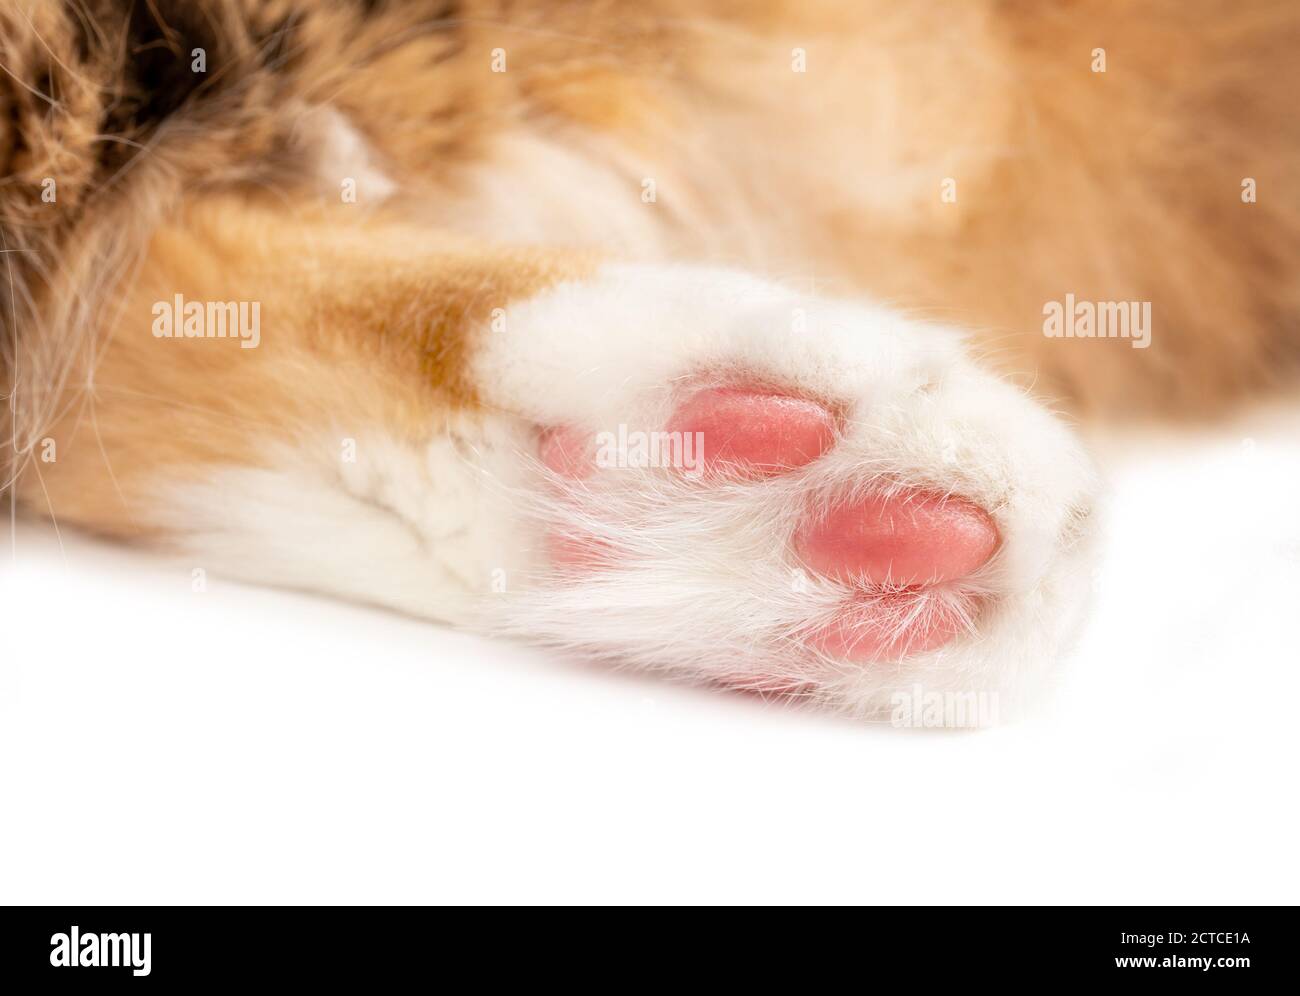 Cat paw close up.  Hind leg of white orange long hair cat. Focus on pink shock absorbed paw pads with soft multicolored blurred cat body. Stock Photo